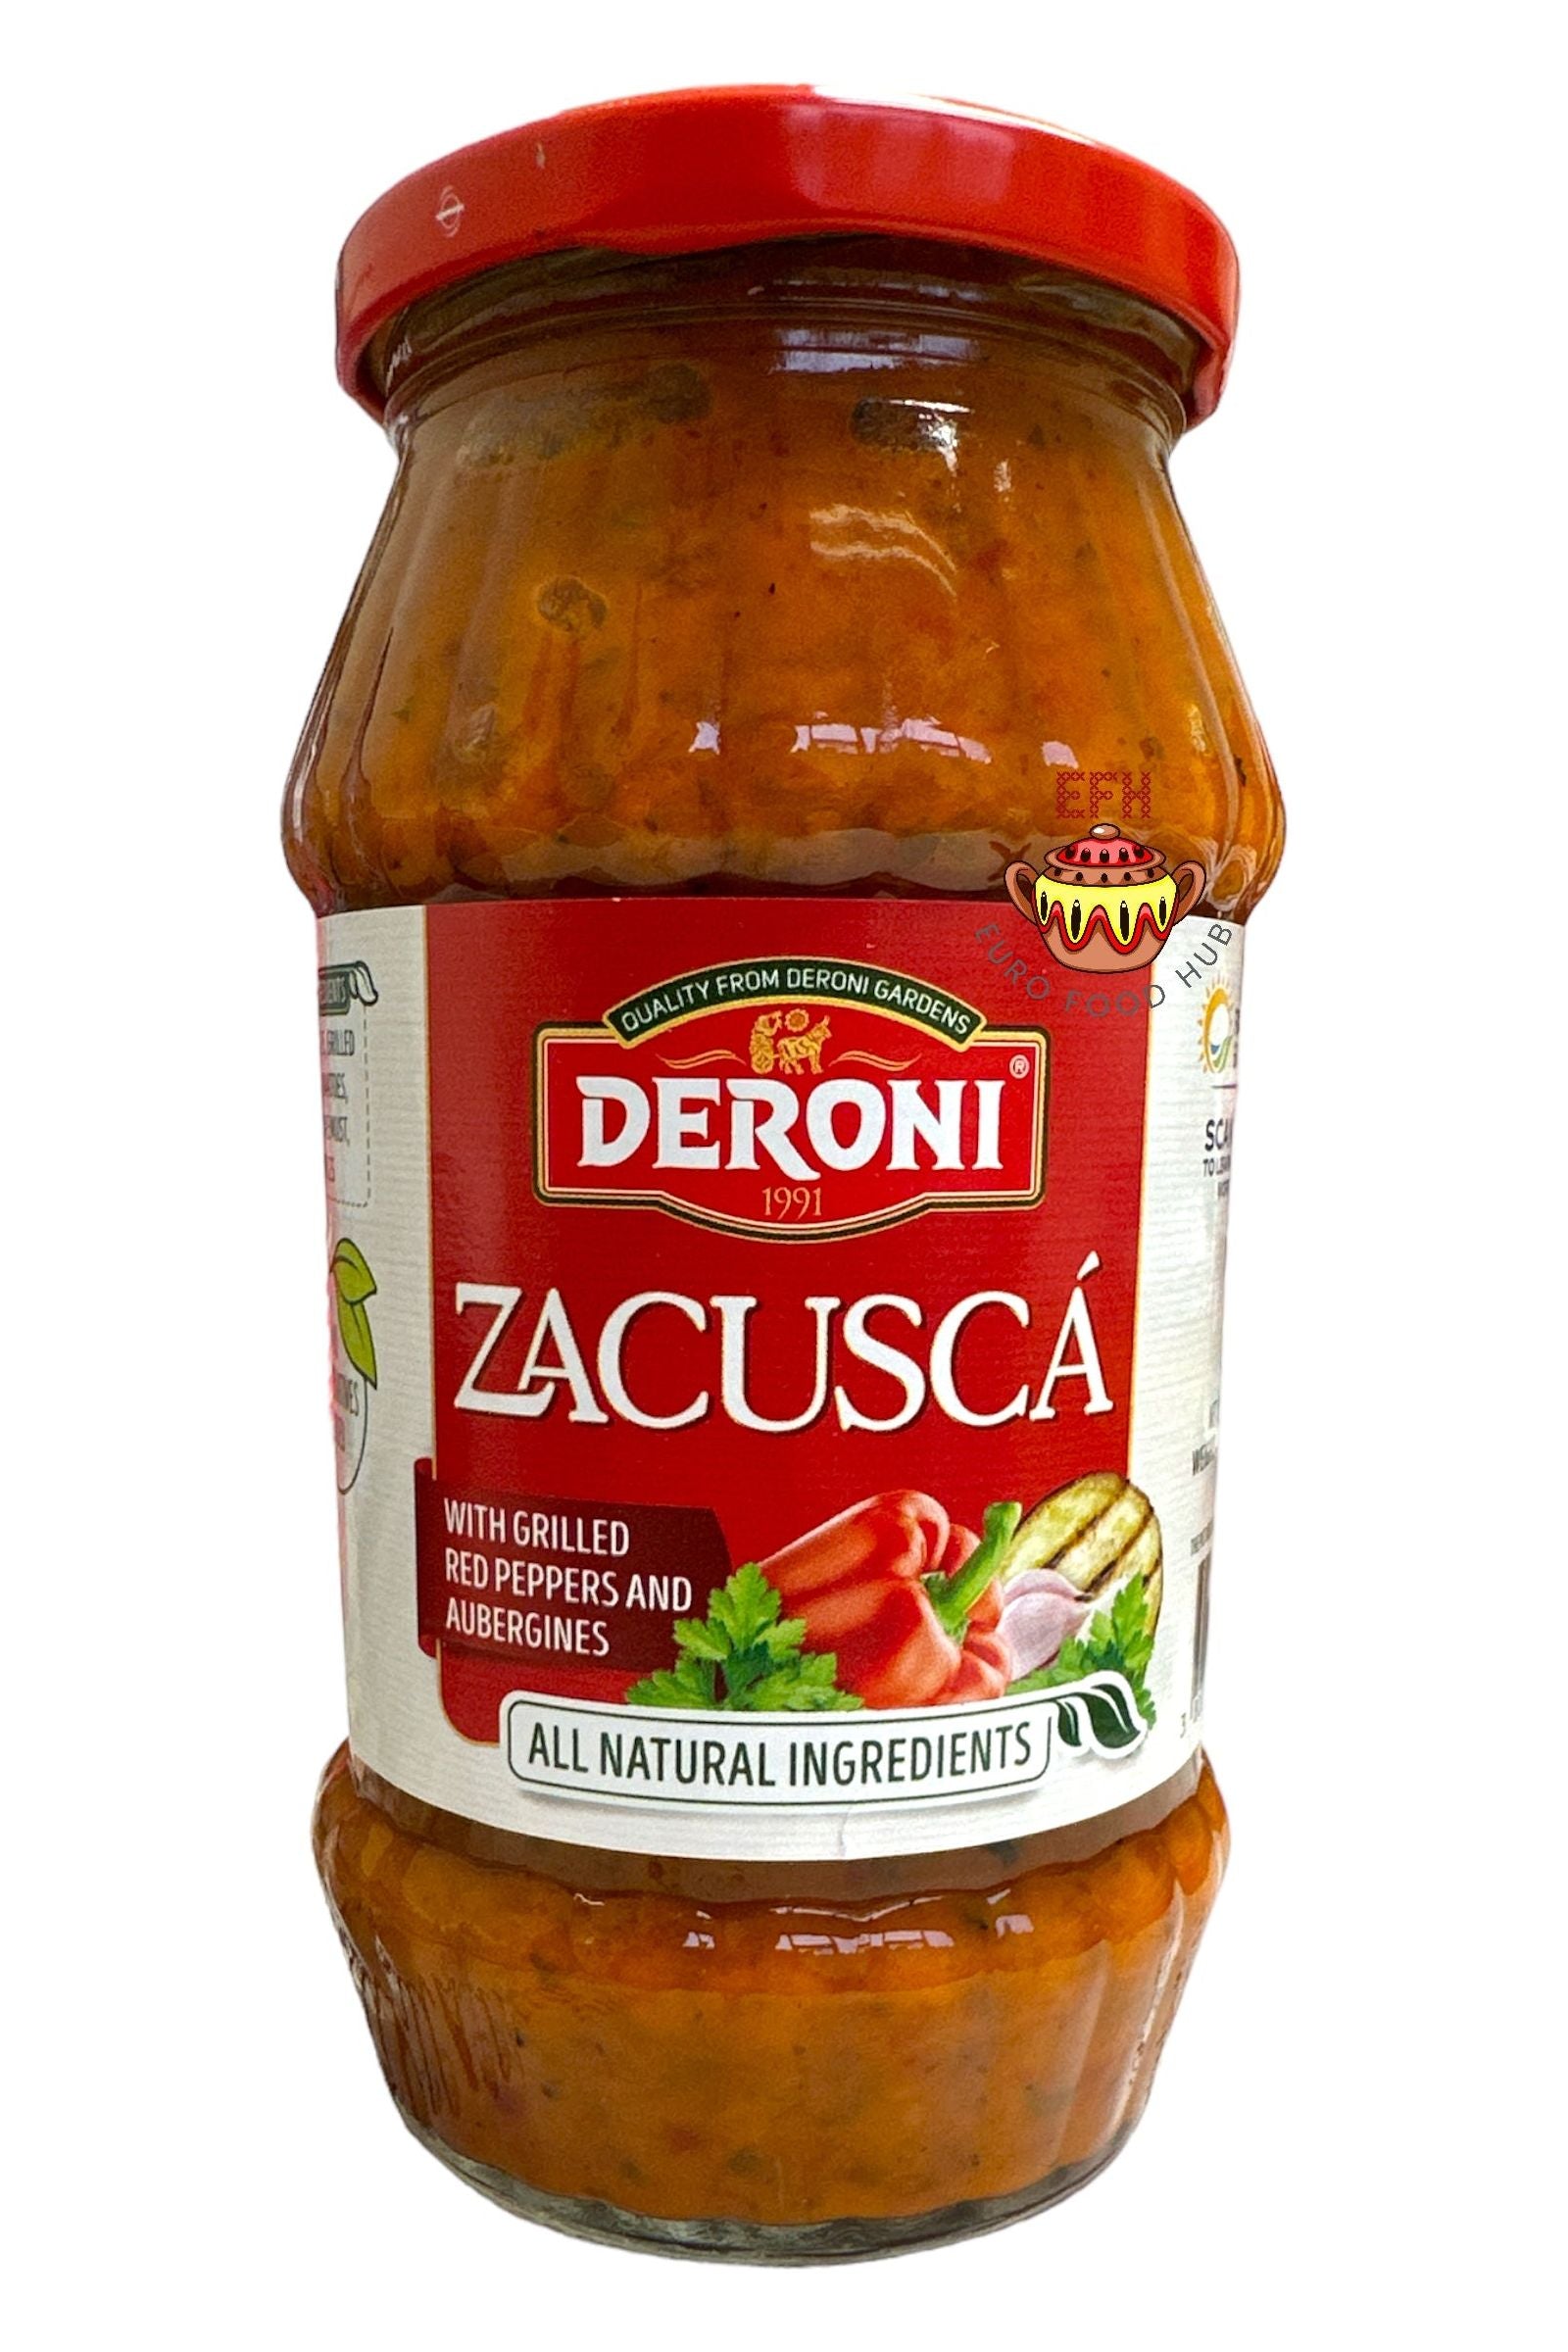 NEW! Deroni Homemade Zacusca with Roasted Peppers - 500g